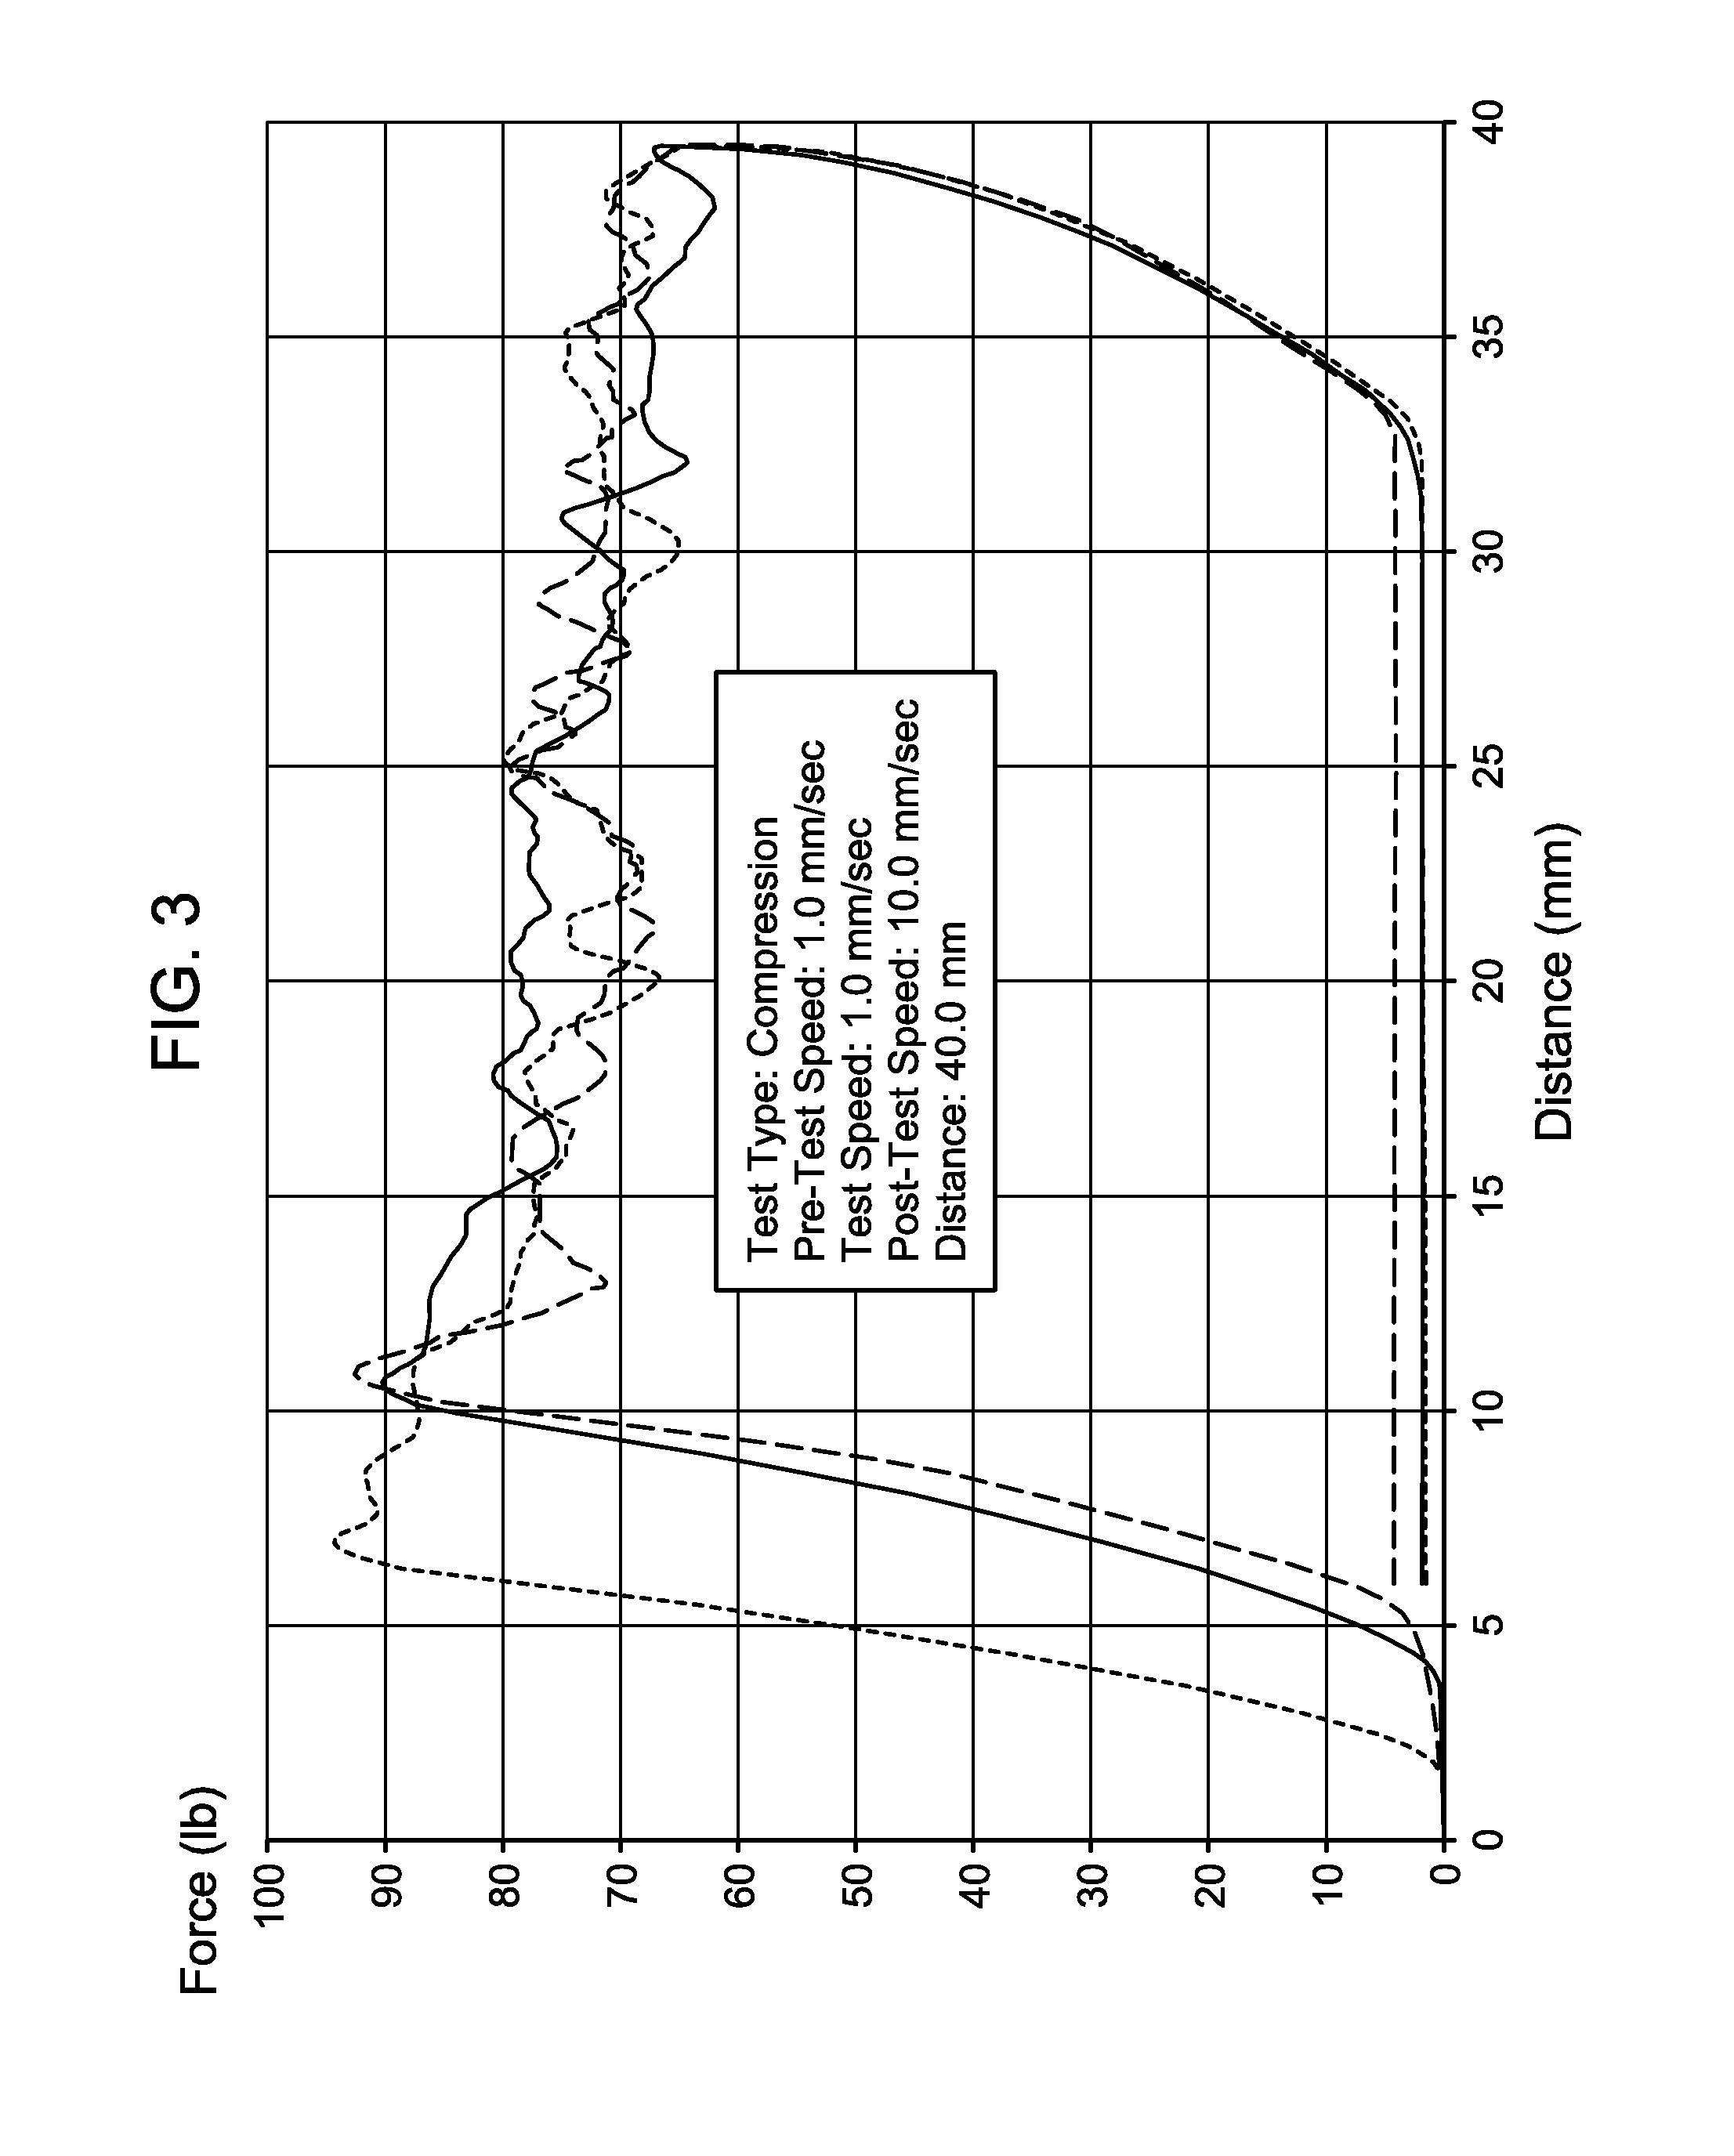 Method of Conversion of a Drilling Mud to a Gel-Based Lost Circulation Material to Combat Lost Circulation During Continuous Drilling